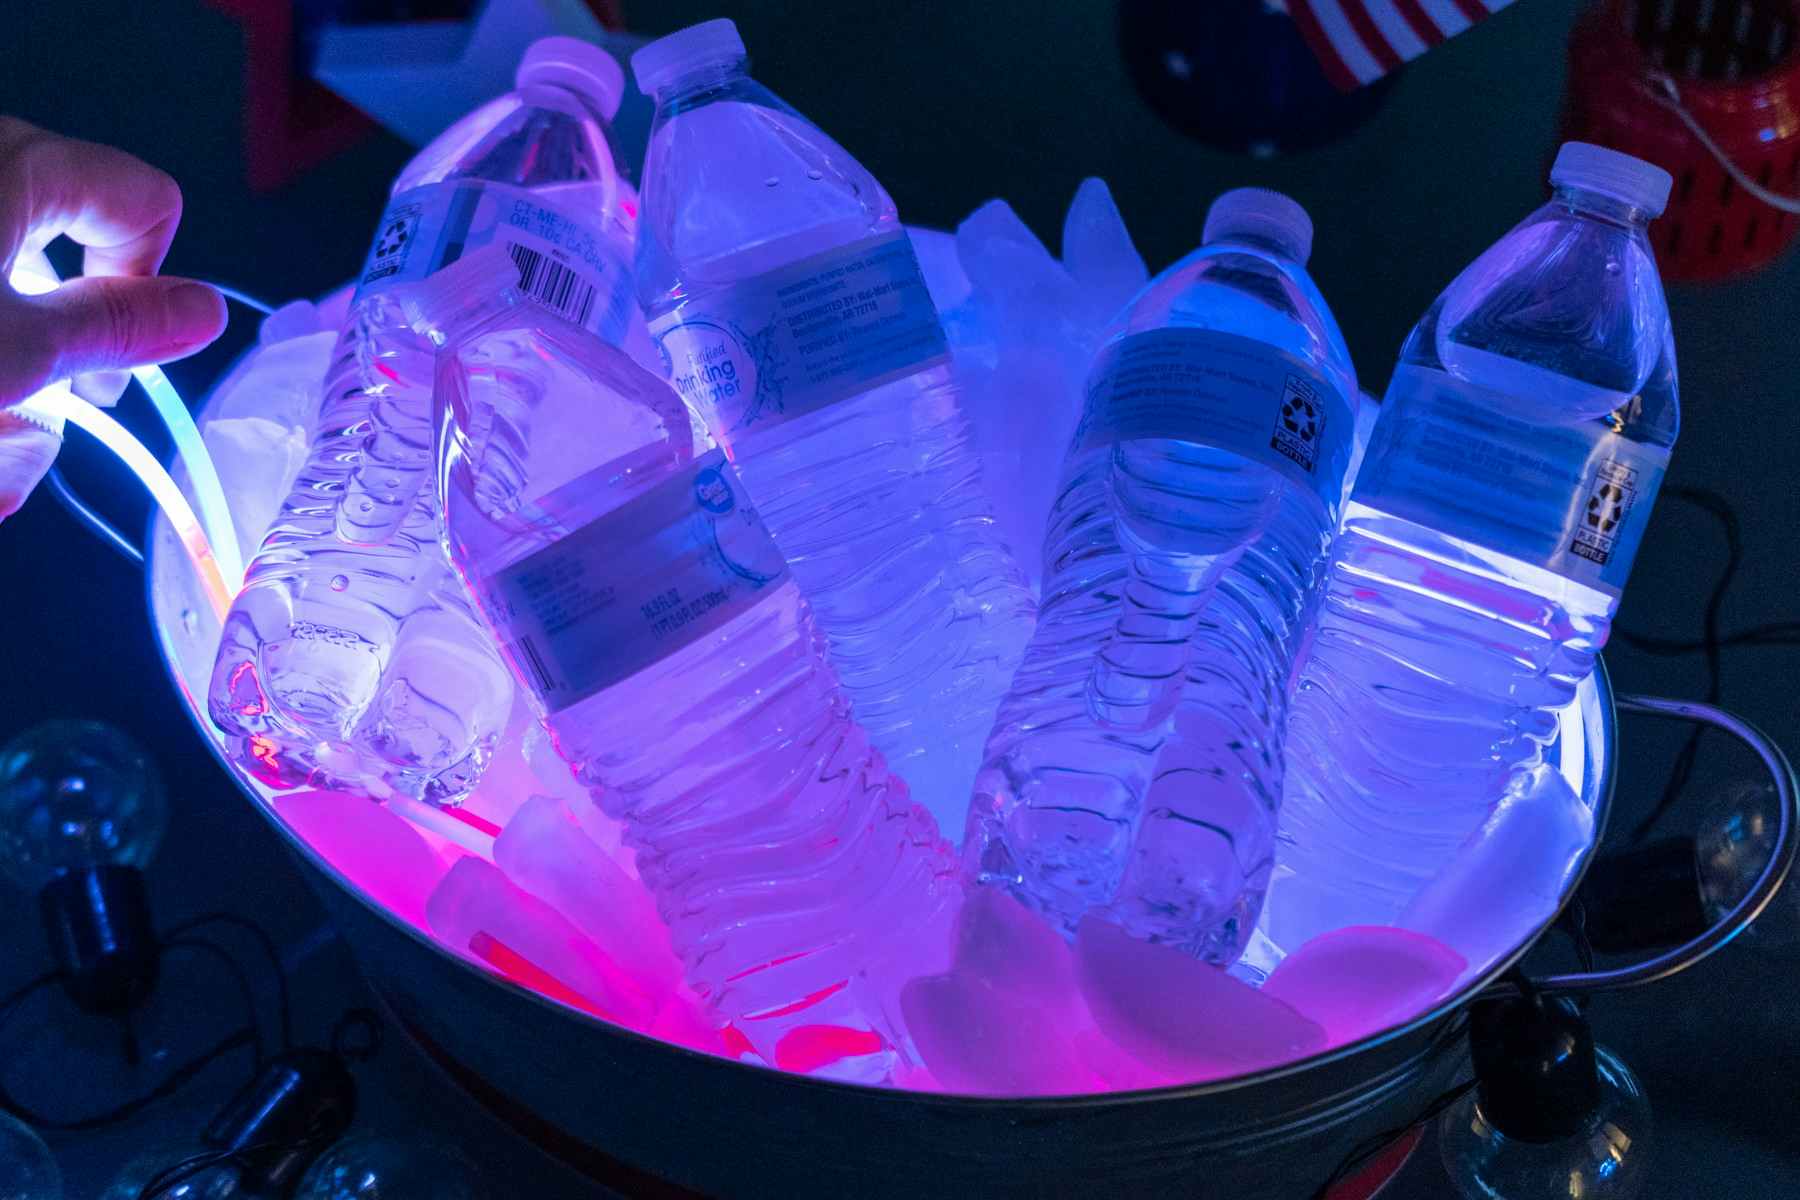 A drink cooler filled with ice and water bottles glowing with red, white, and blue glow sticks.